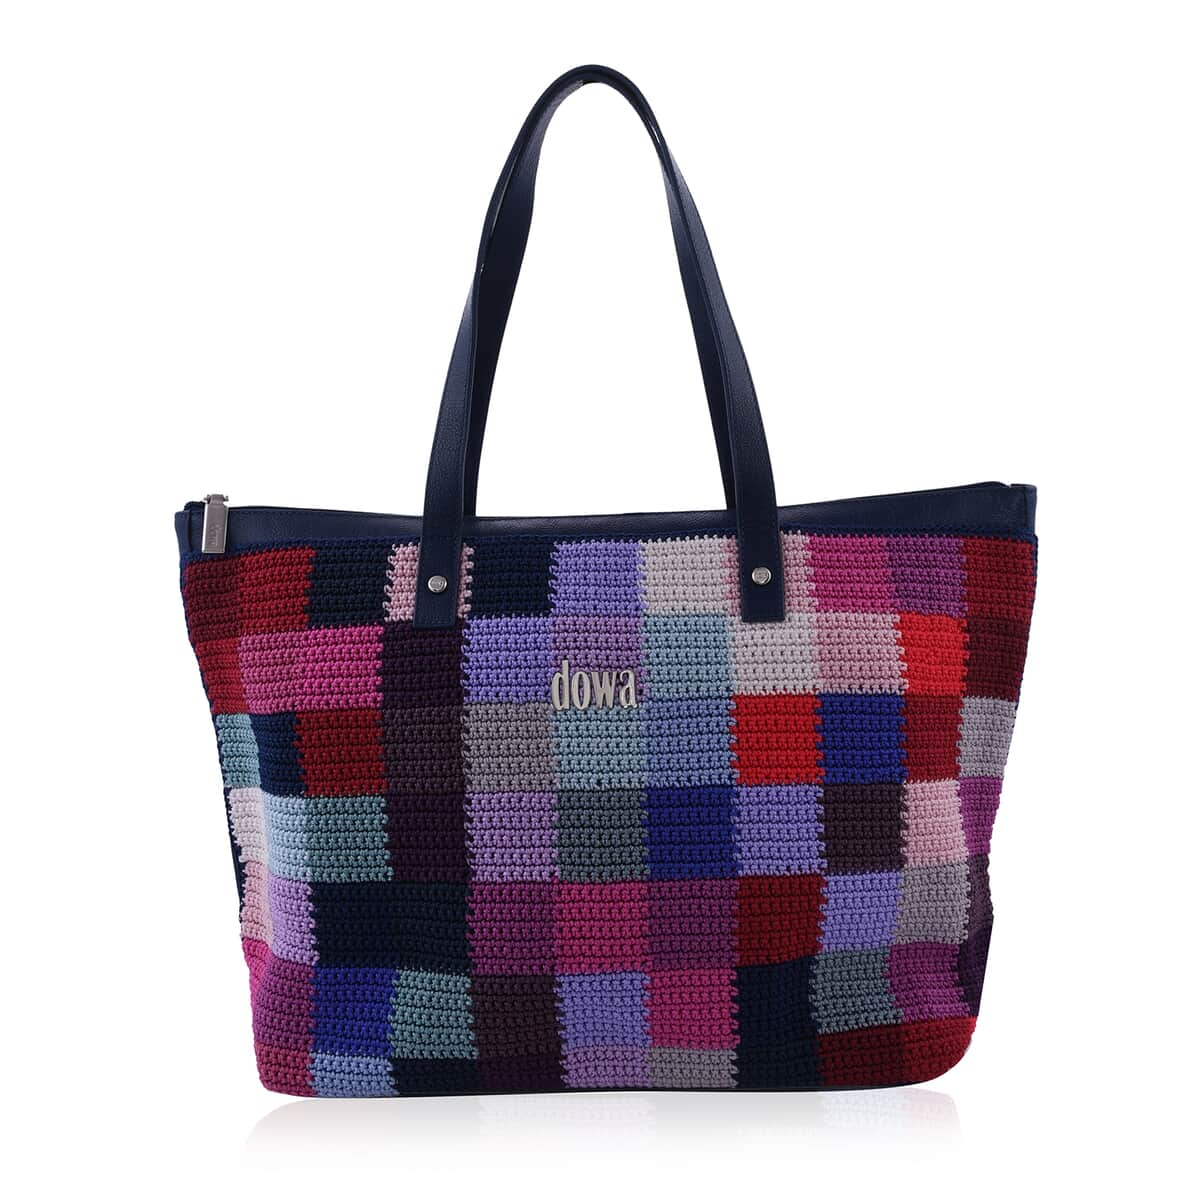 DOWA Multi Color Indigo 100% Nylon with Leather Handwoven Tote Bag image number 0